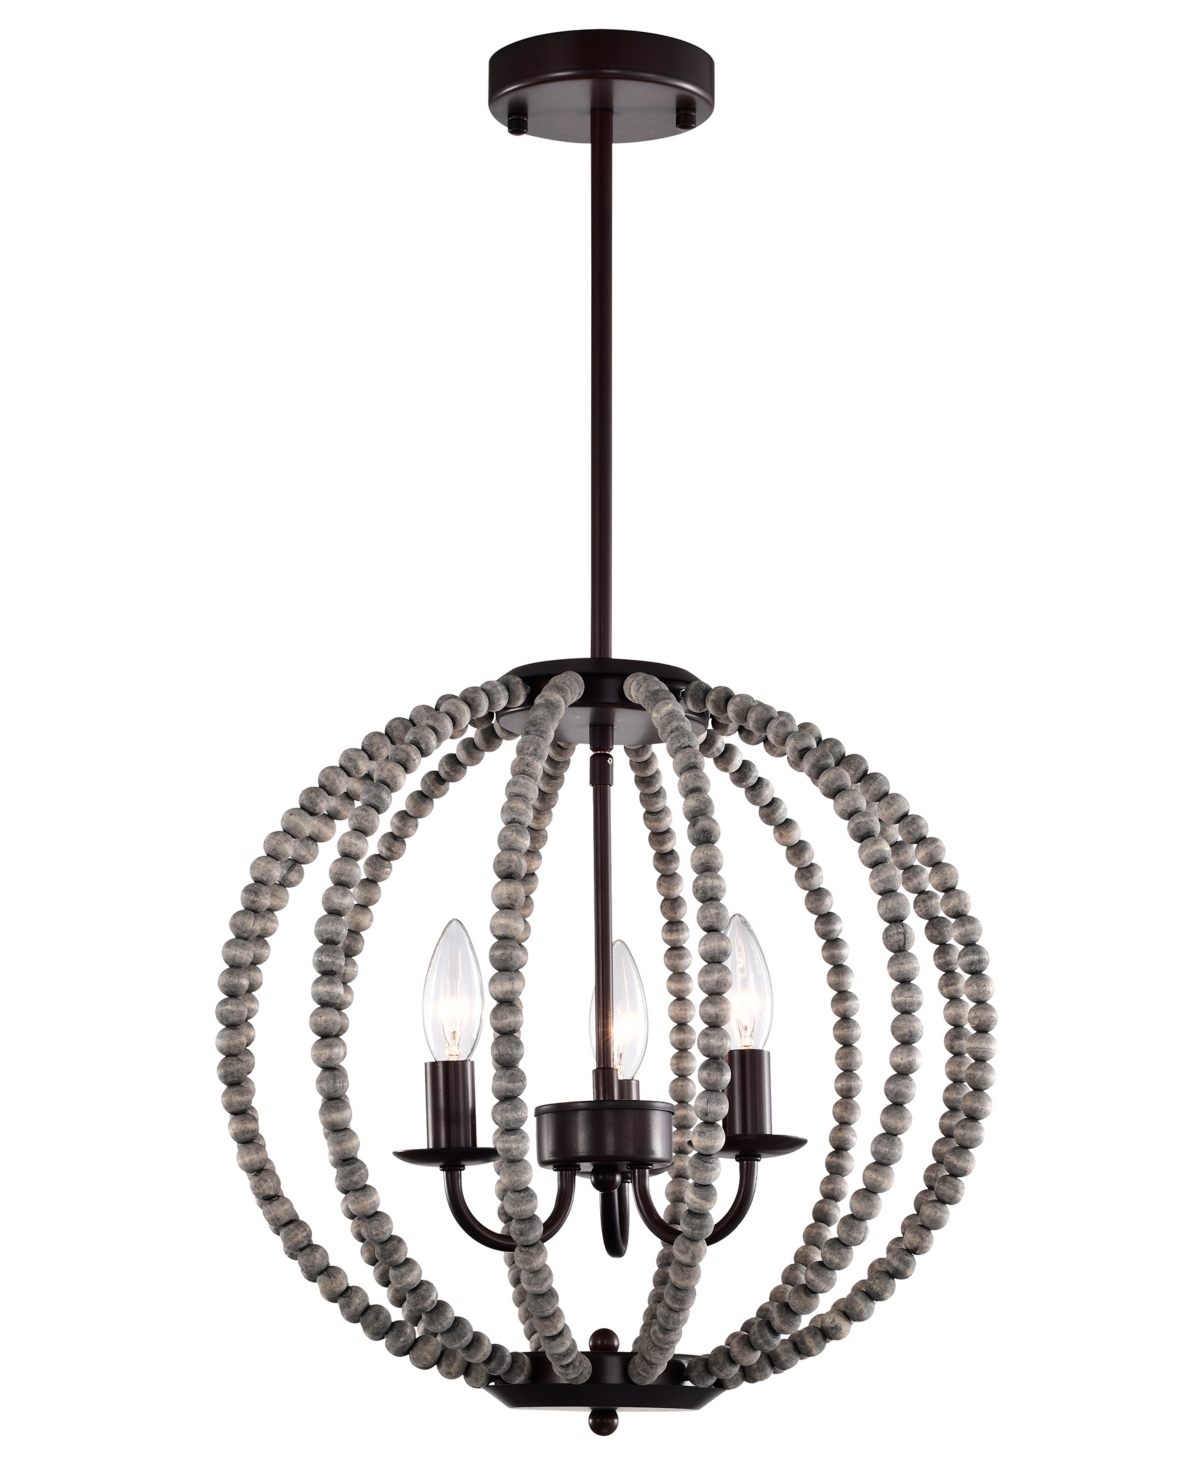 Home Accessories Casey 16" Indoor Finish Chandelier With Light Kit In Matte Dark Brown And Gray